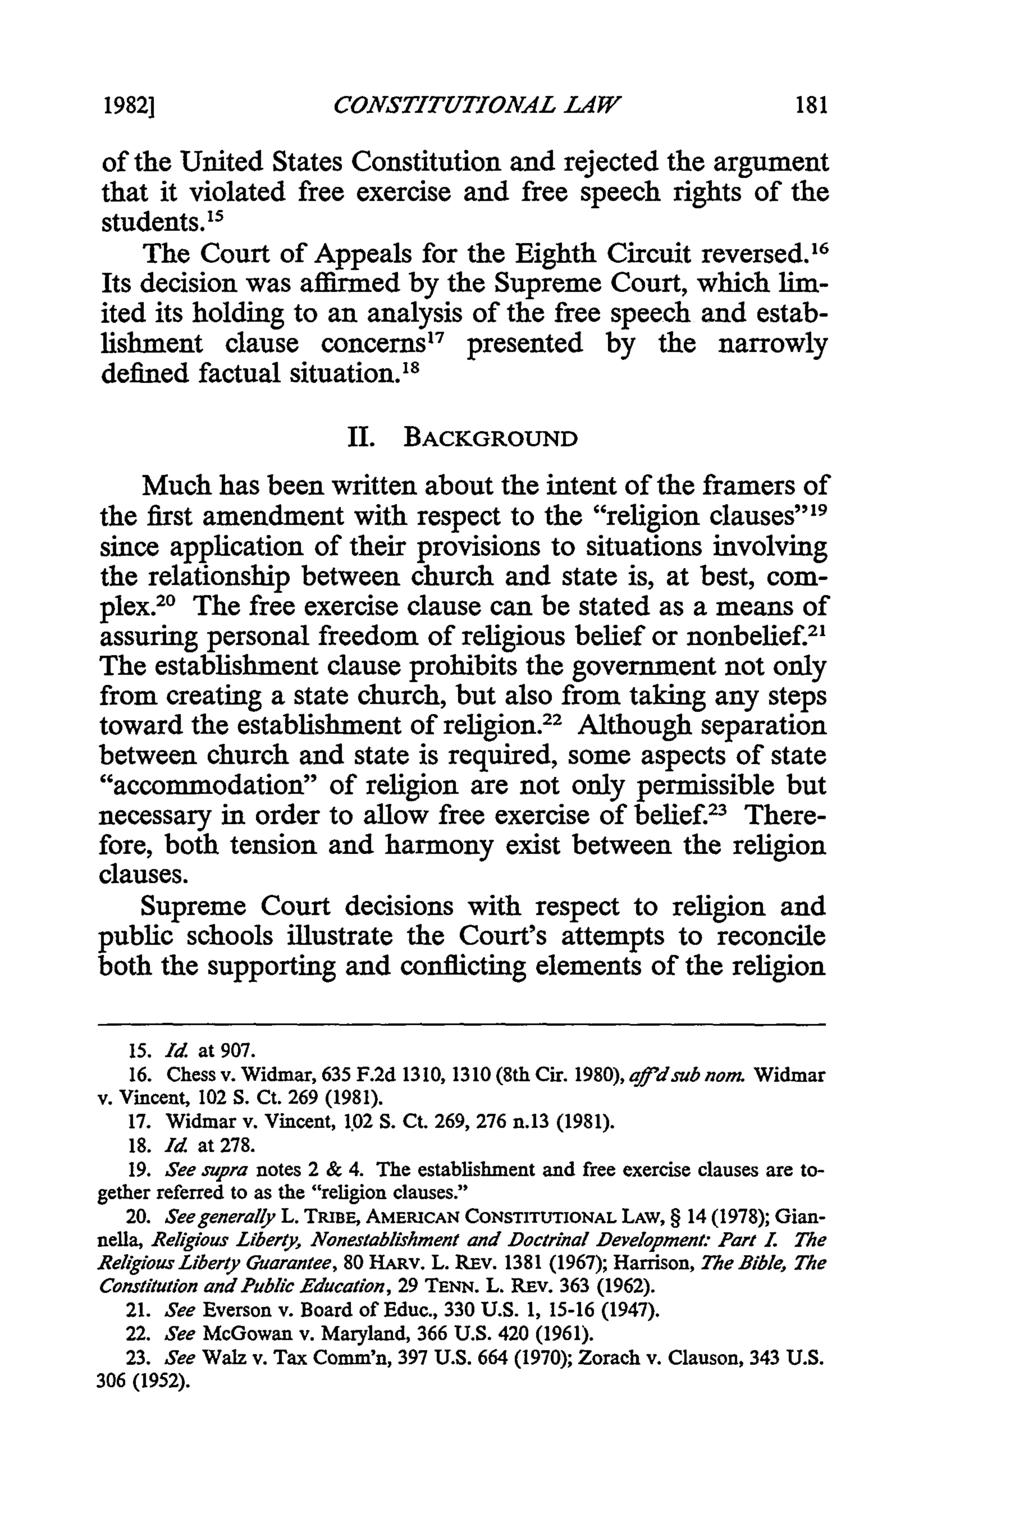 1982] CONSTITUTIONAL LAW of the United States Constitution and rejected the argument that it violated free exercise and free speech rights of the students.